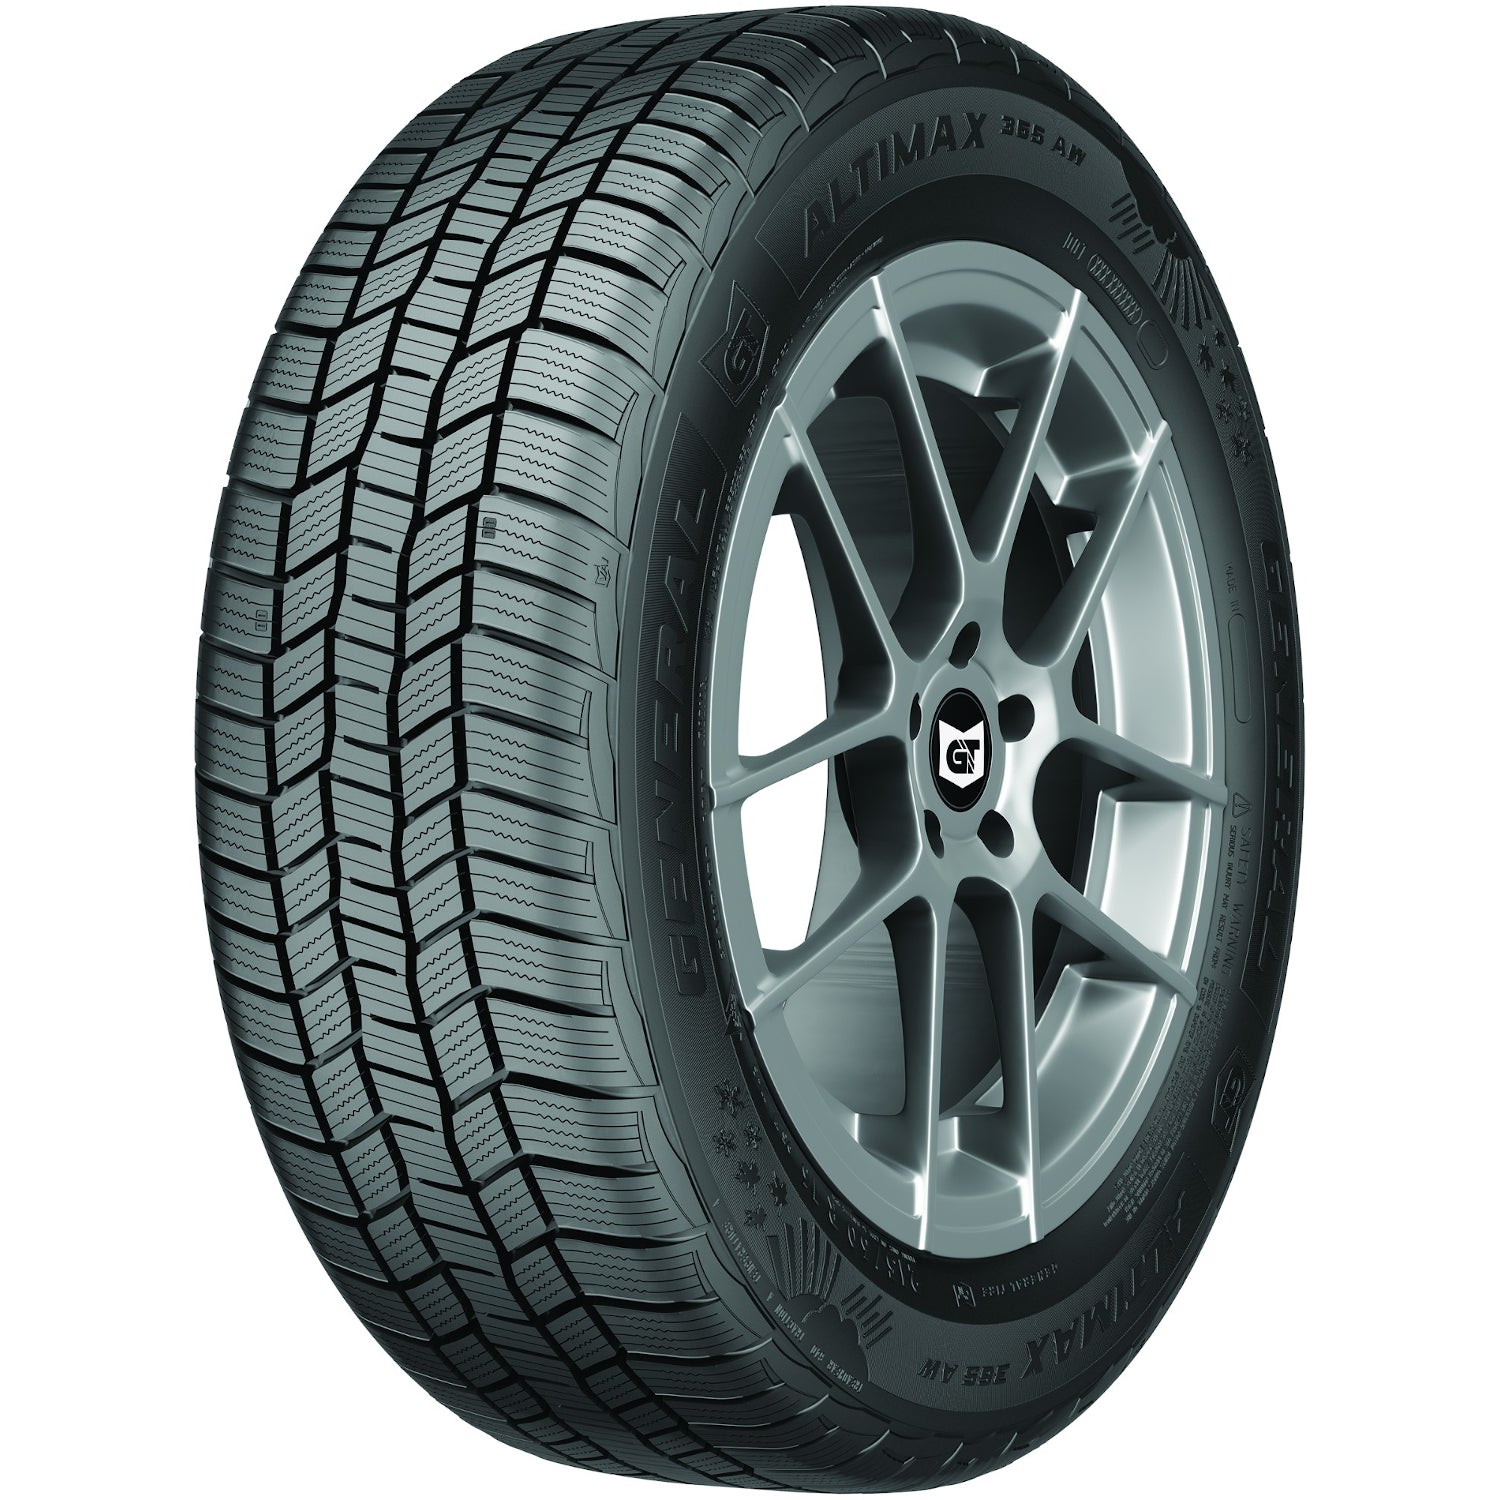 GENERAL ALTIMAX 365AW 195/60R15 (24.2X7.7R 15) Tires